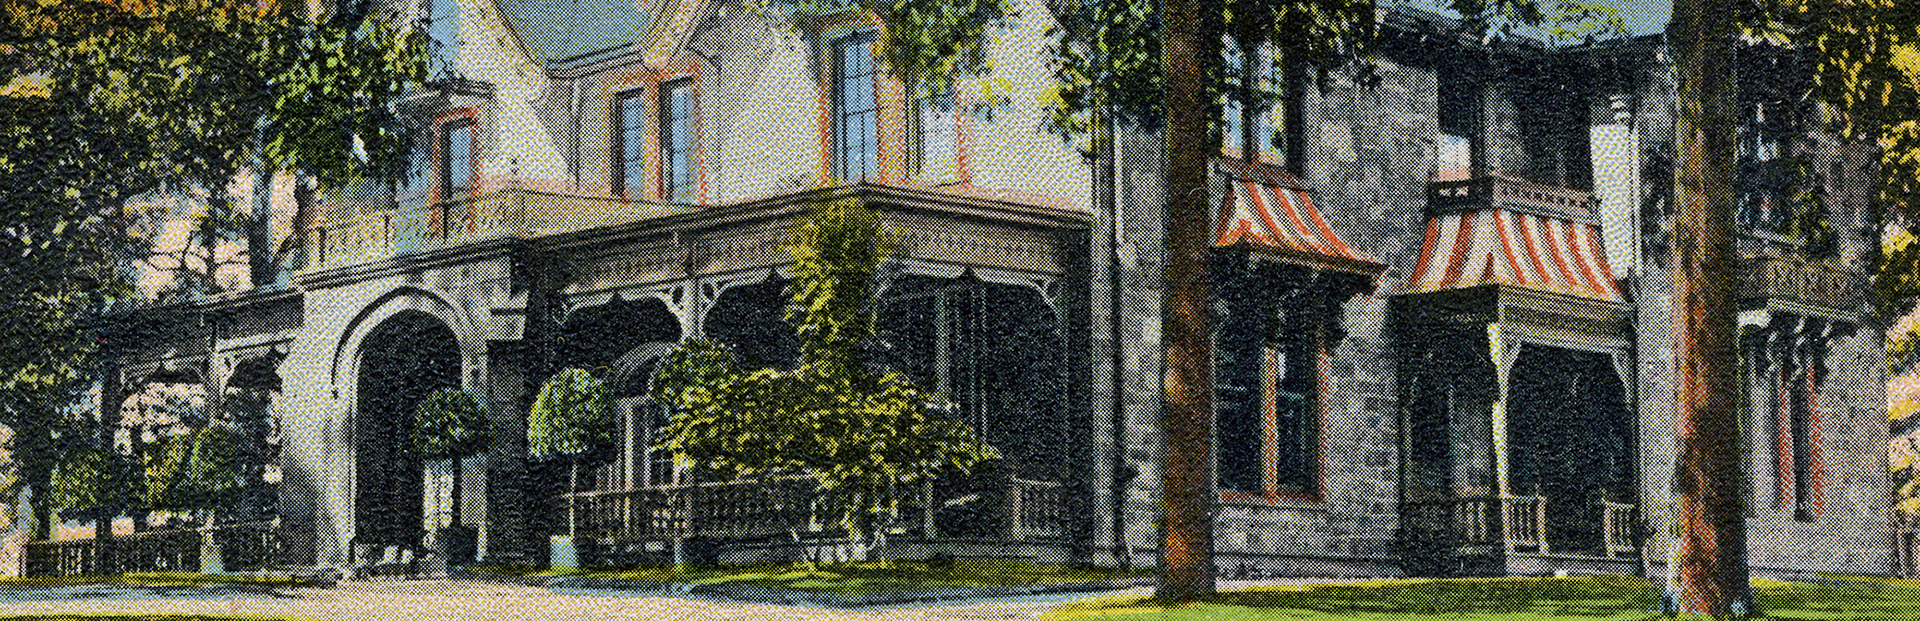 detail of cover image showing a historic postcard image of the Hoyt House, AKA: The Point in Staatsburg, NY a stone house in the gothic style